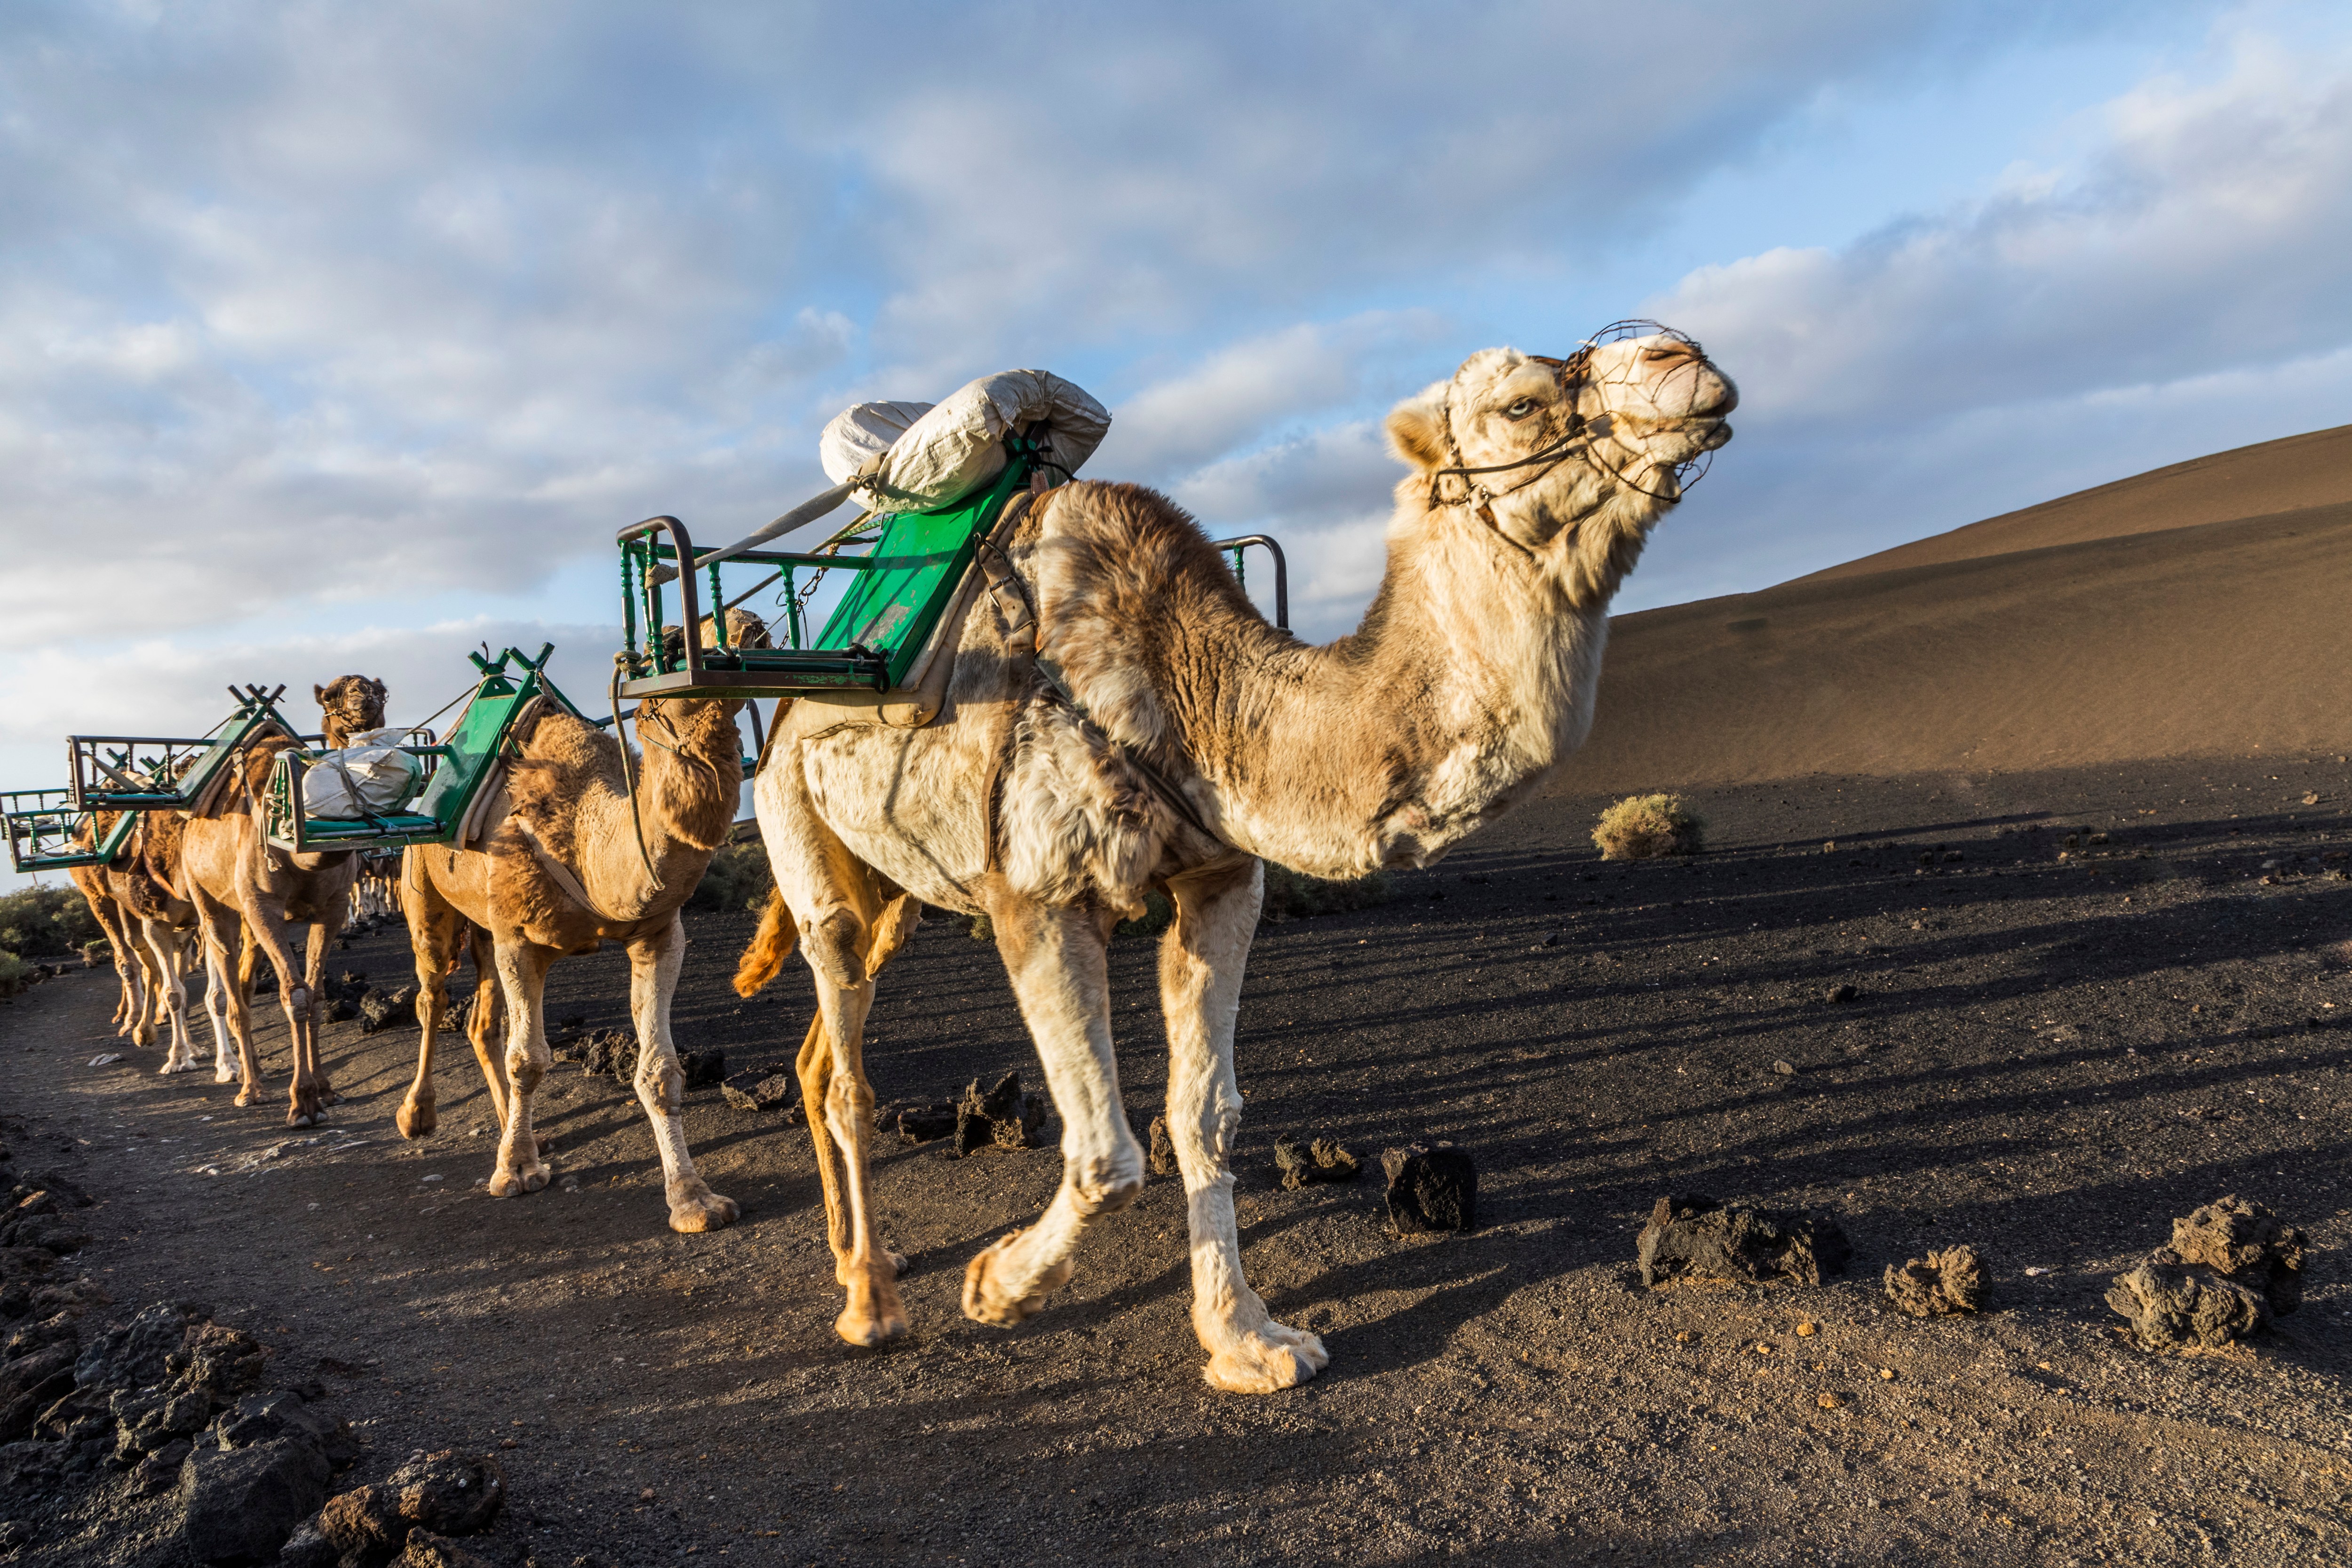 P&O Cruises’ Canary Islands trips include excursions such as camel rides in Lanzarote’s Timanfaya National Park